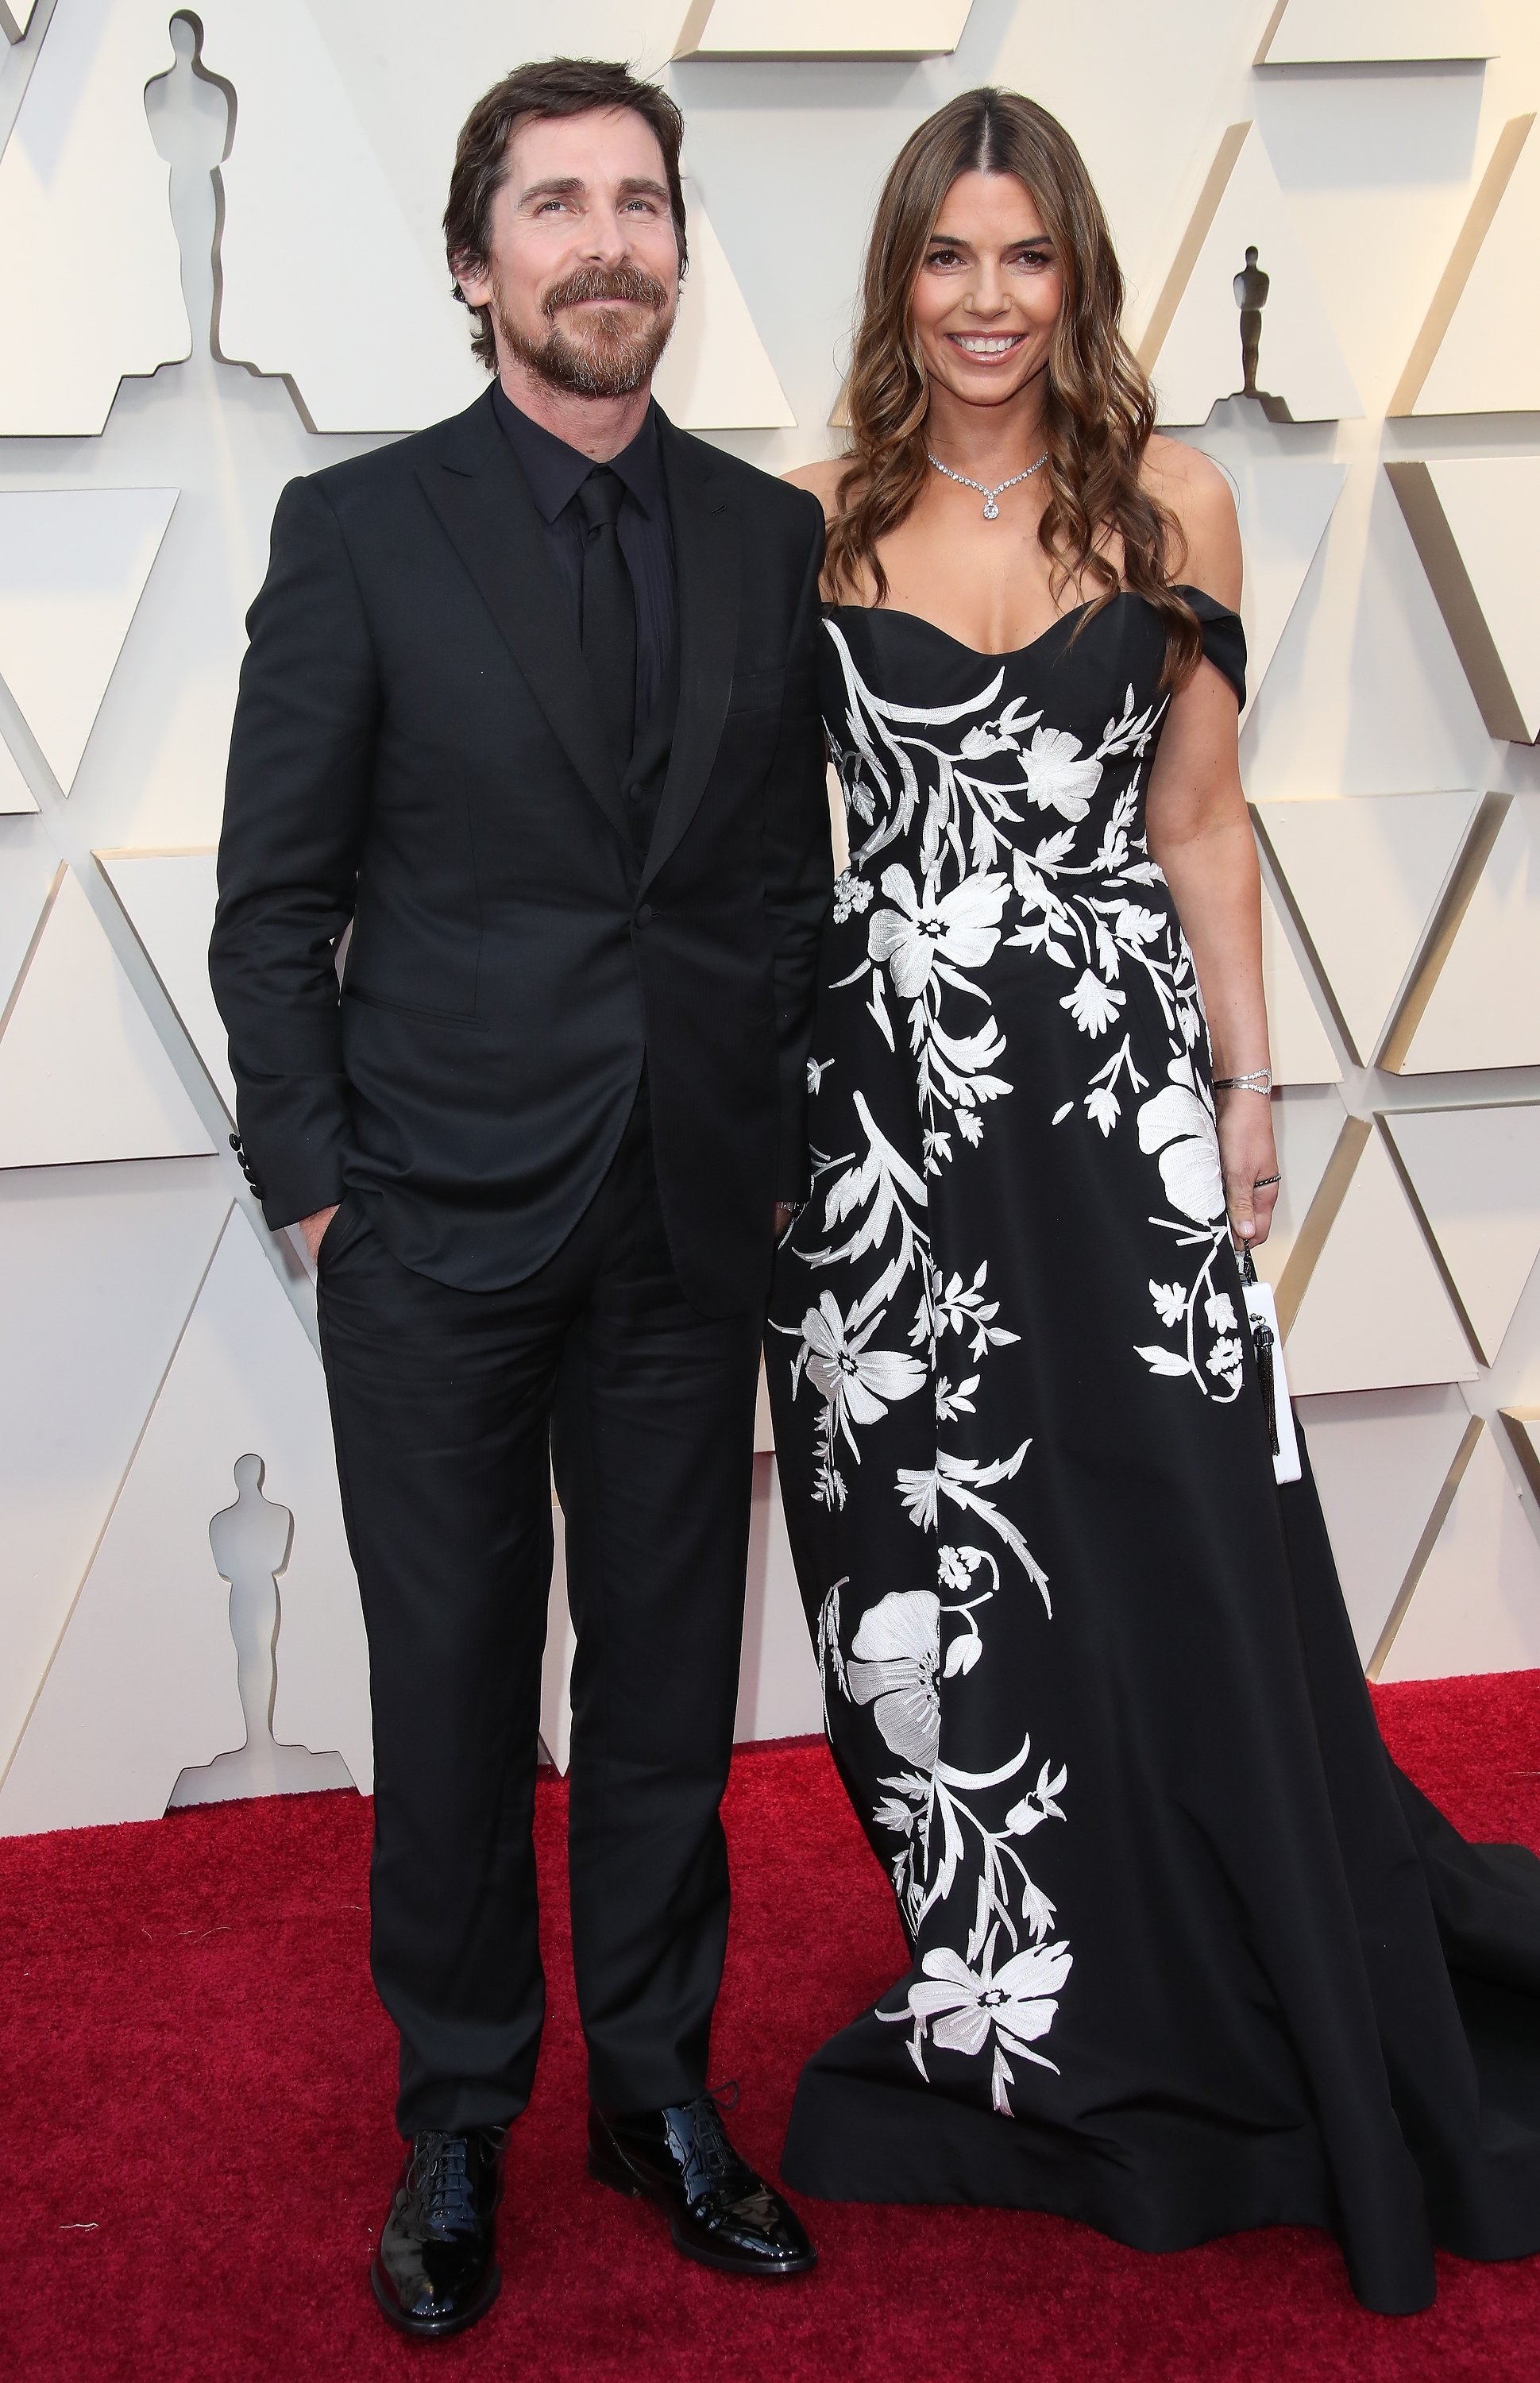 Christian Bale and Sibi Blažić at the 91st Annual Academy Awards on February 24, 2019 | Source: Getty Images